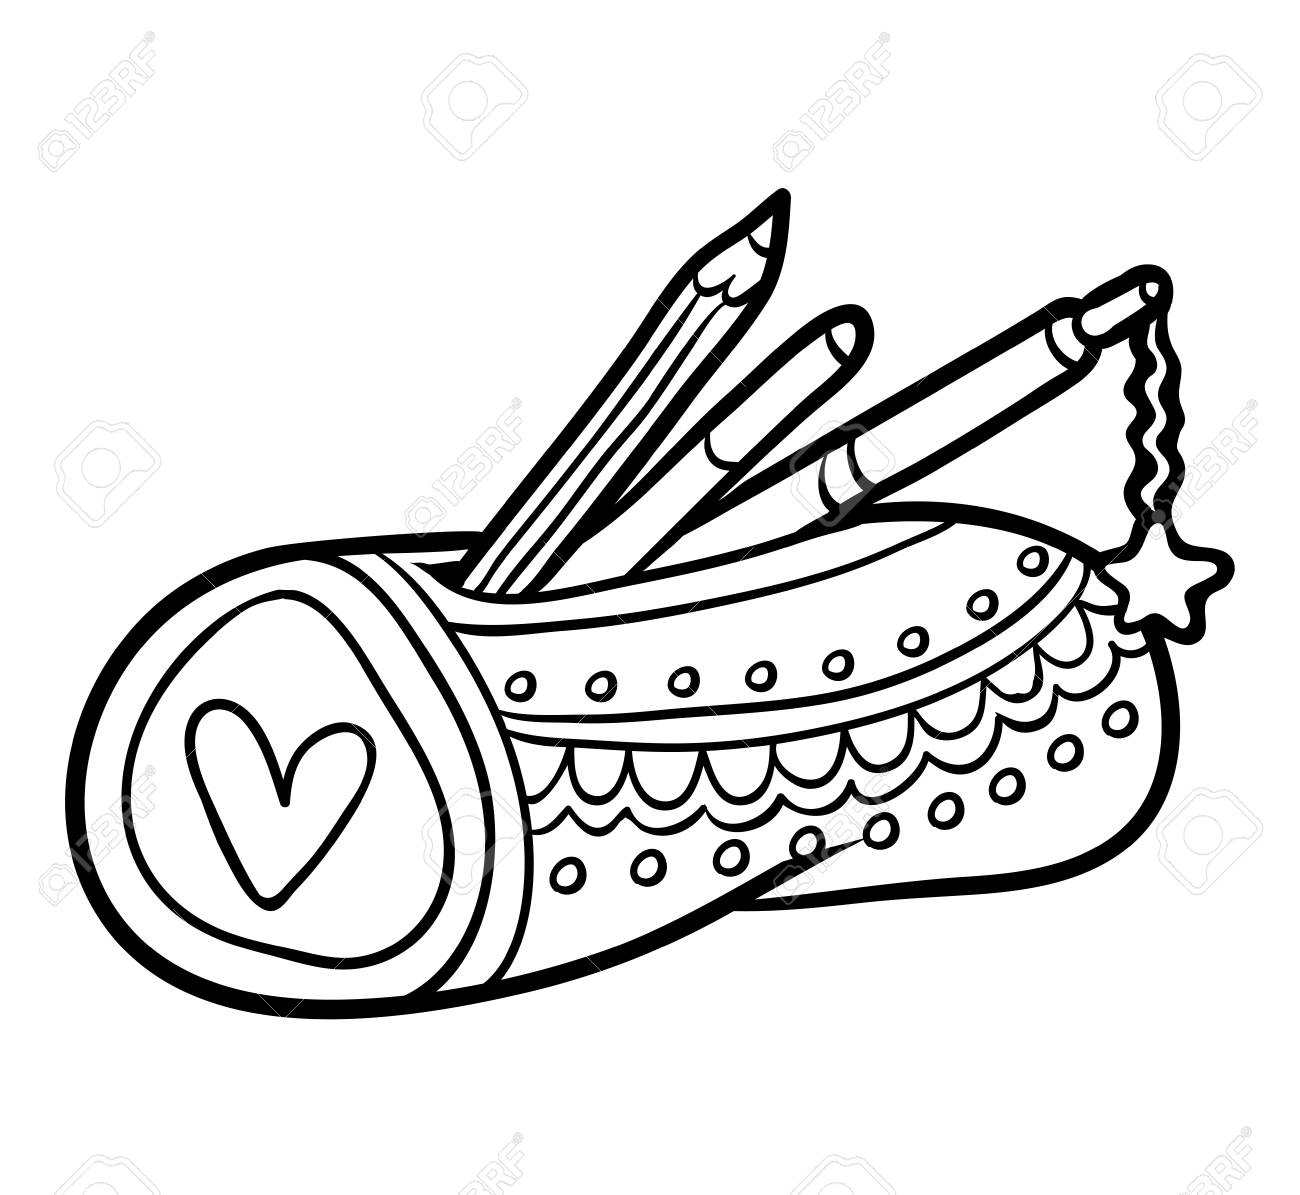 Coloring book pencil case clipart station jpg